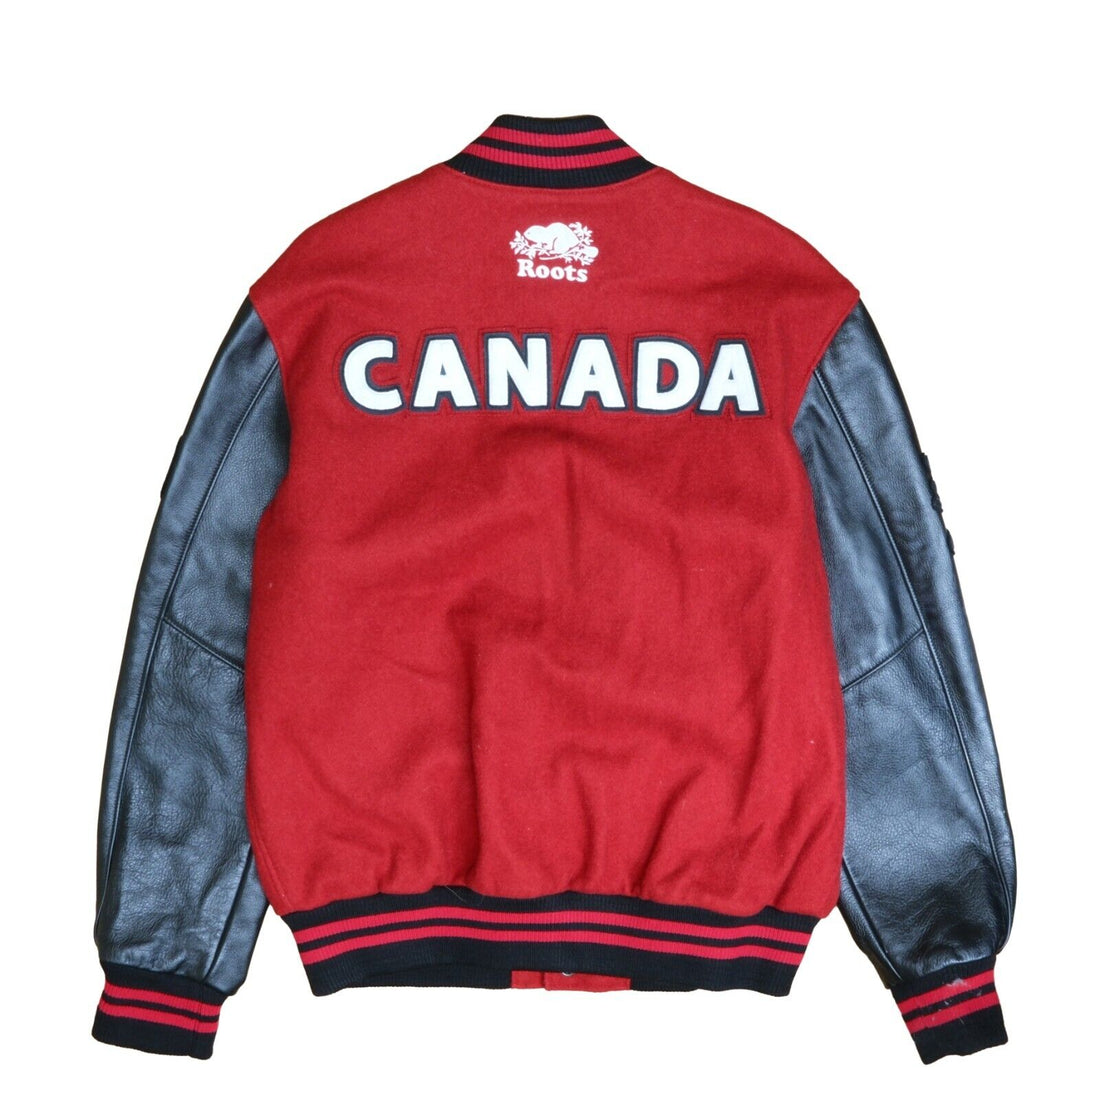 Roots Canada Invictus Games Toronto Leather Wool Varsity Bomber Jacket XL 2017